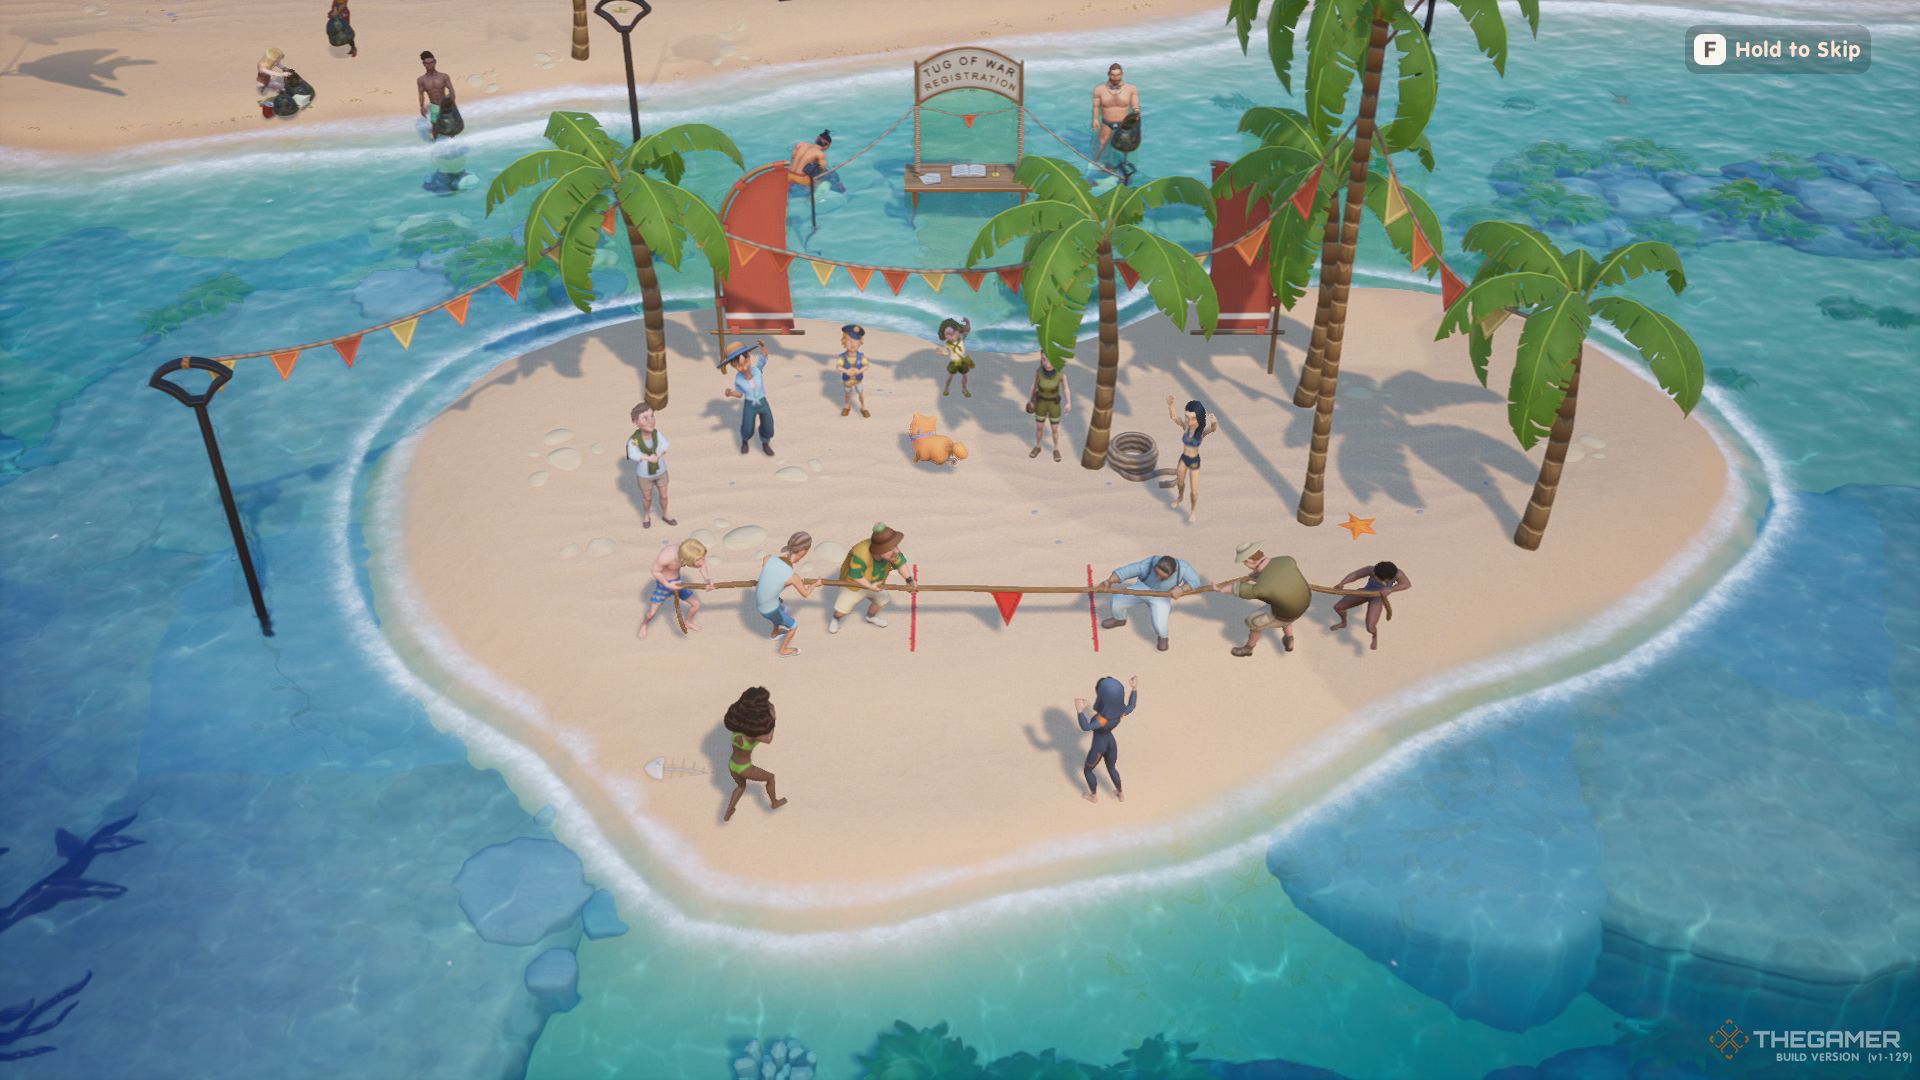 Tug-o-war minigame overview in Coral Island